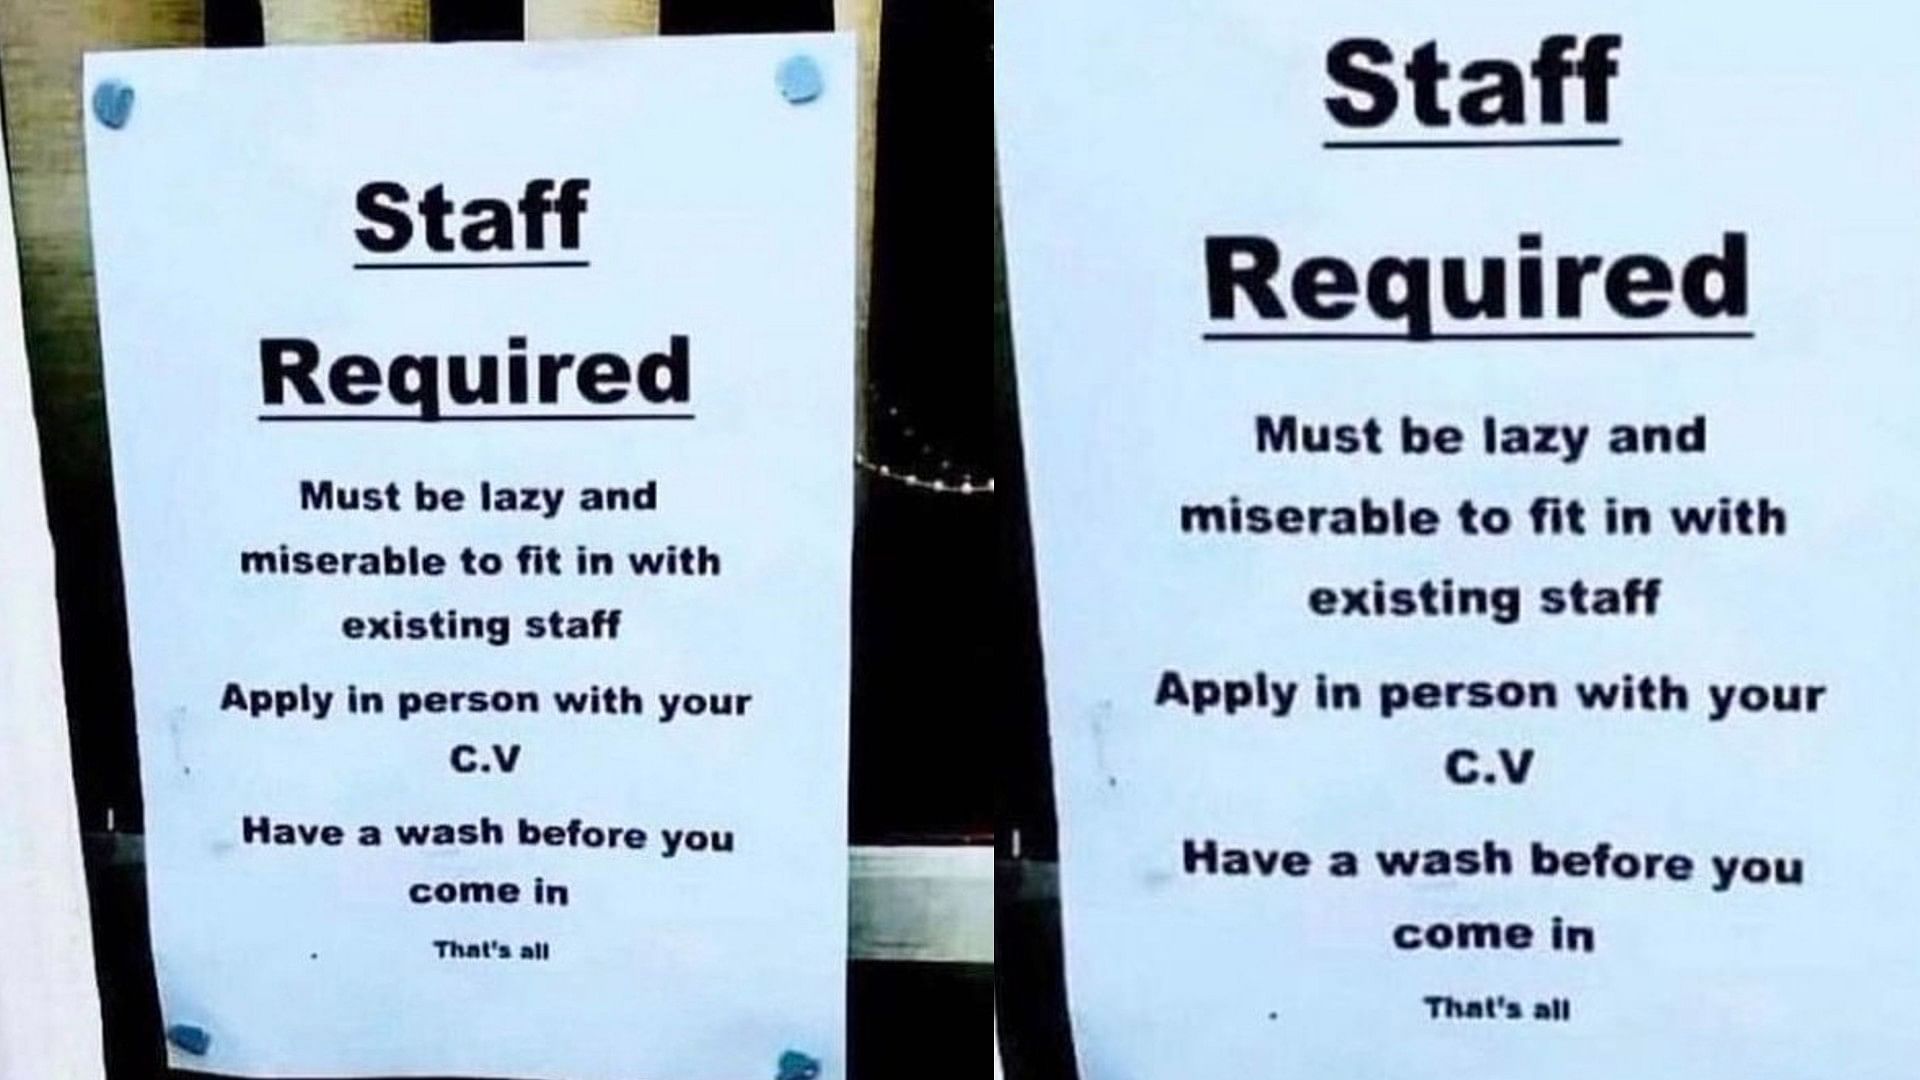 Job Ads: This company has removed vacancies for lazy people